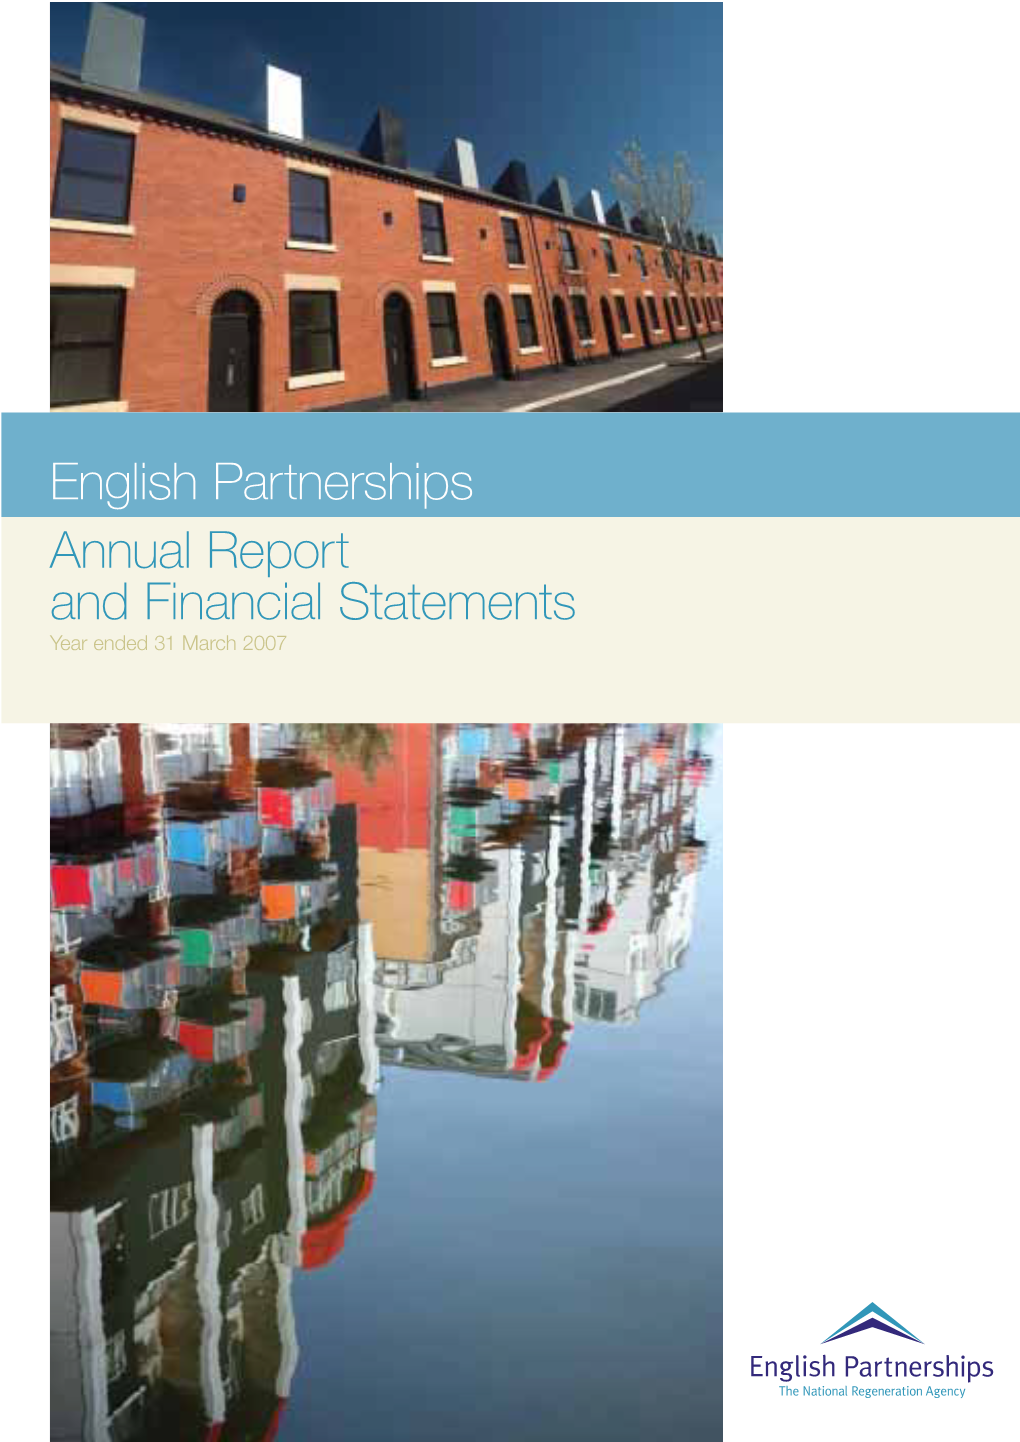 English Partnerships Annual Report and Financial Statements 2006/2007